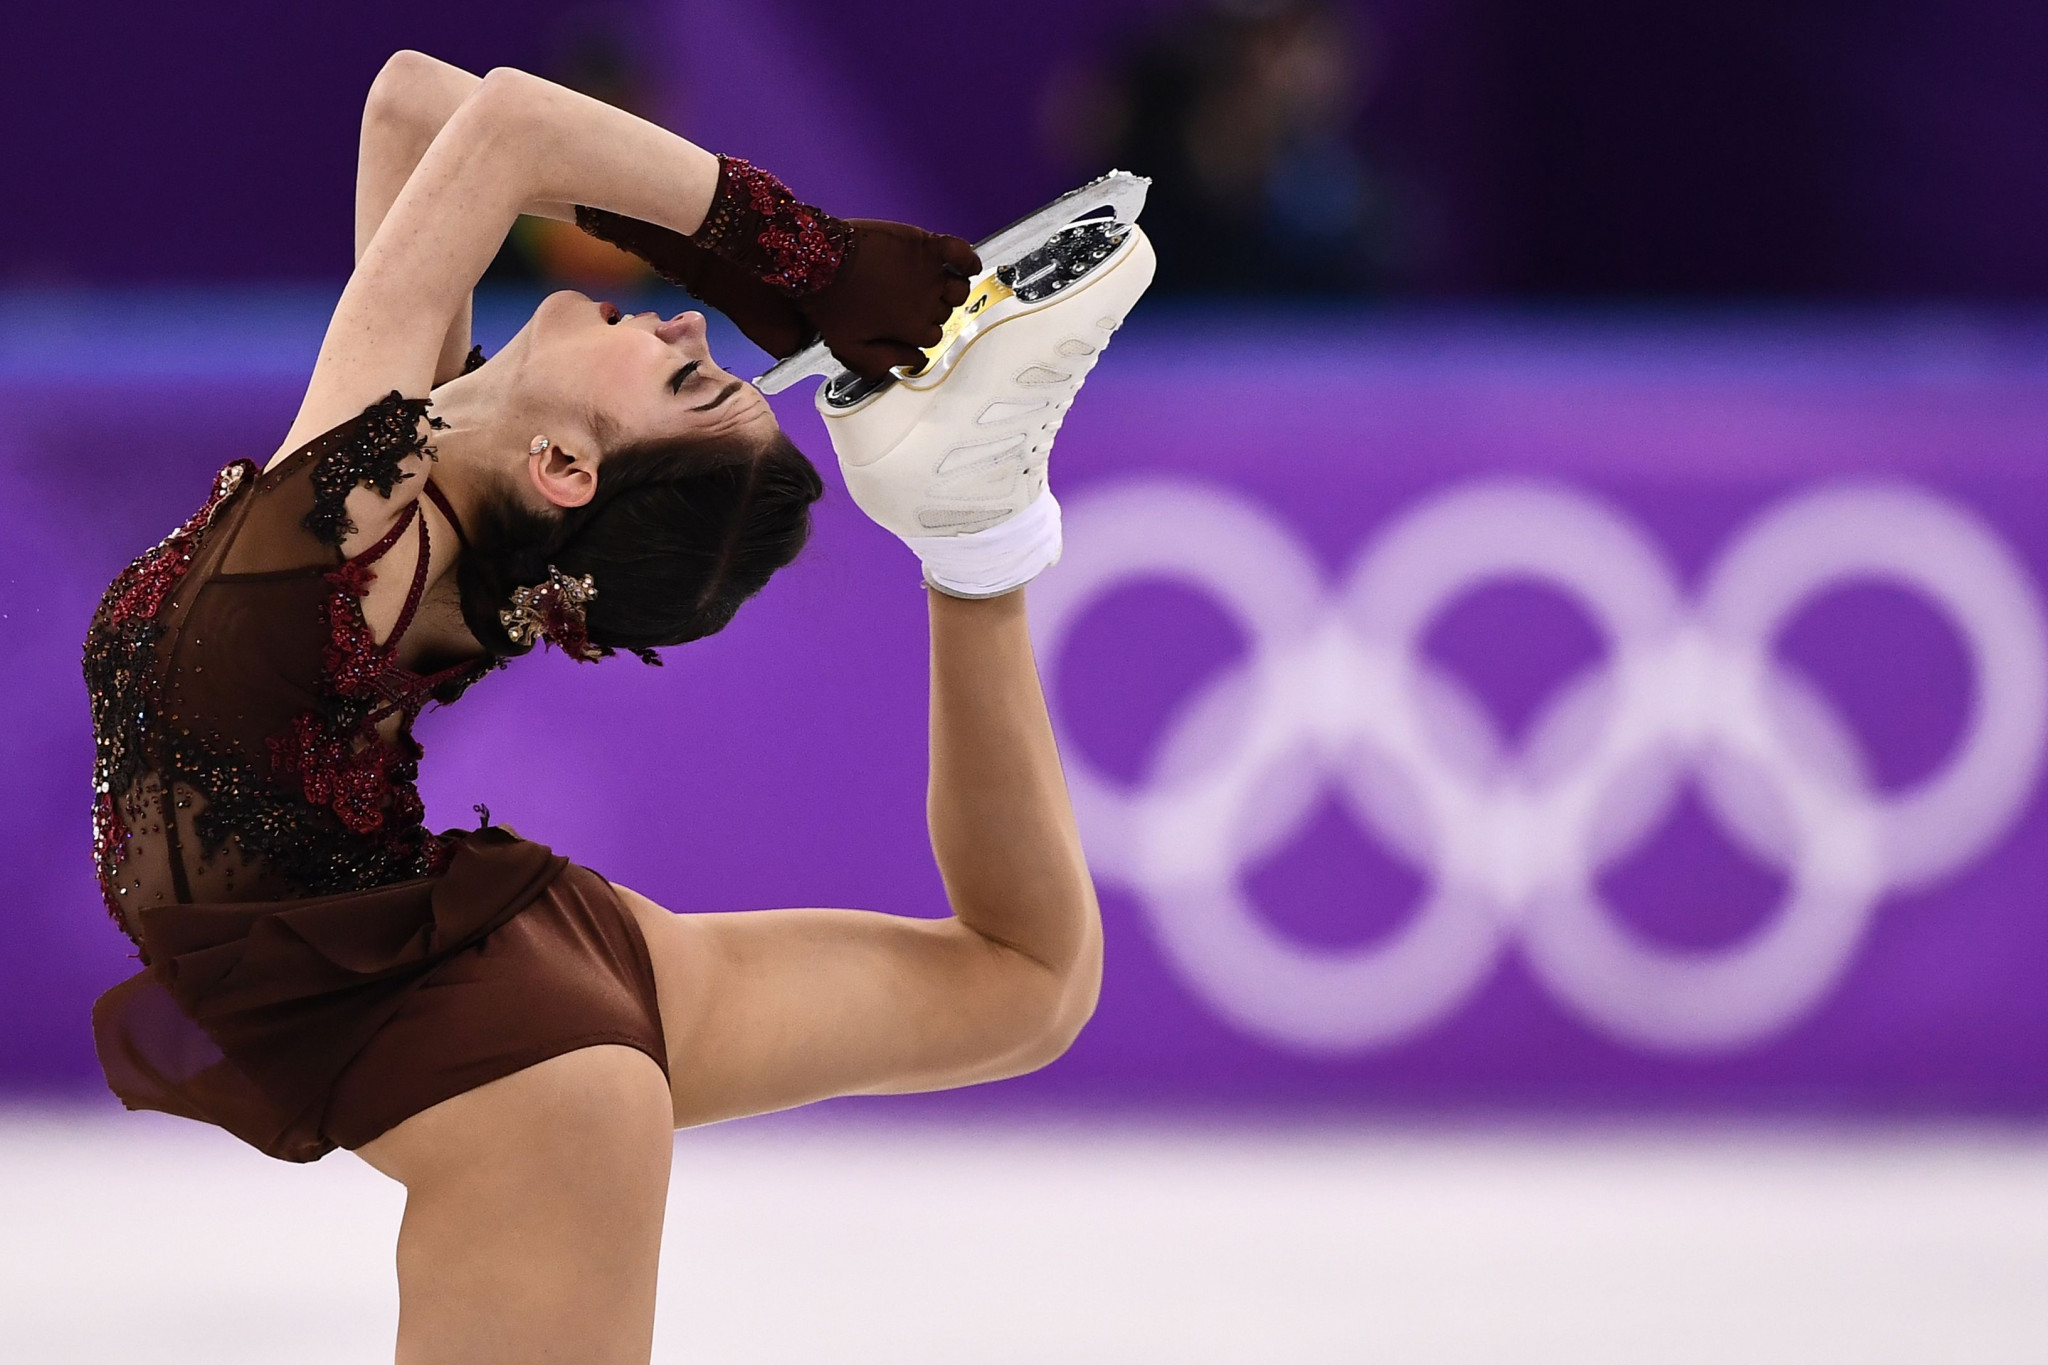 Evgenia Medvedeva was a favourite for gold at Pyeongchang 2018 but had to settle for silver ©Getty Images